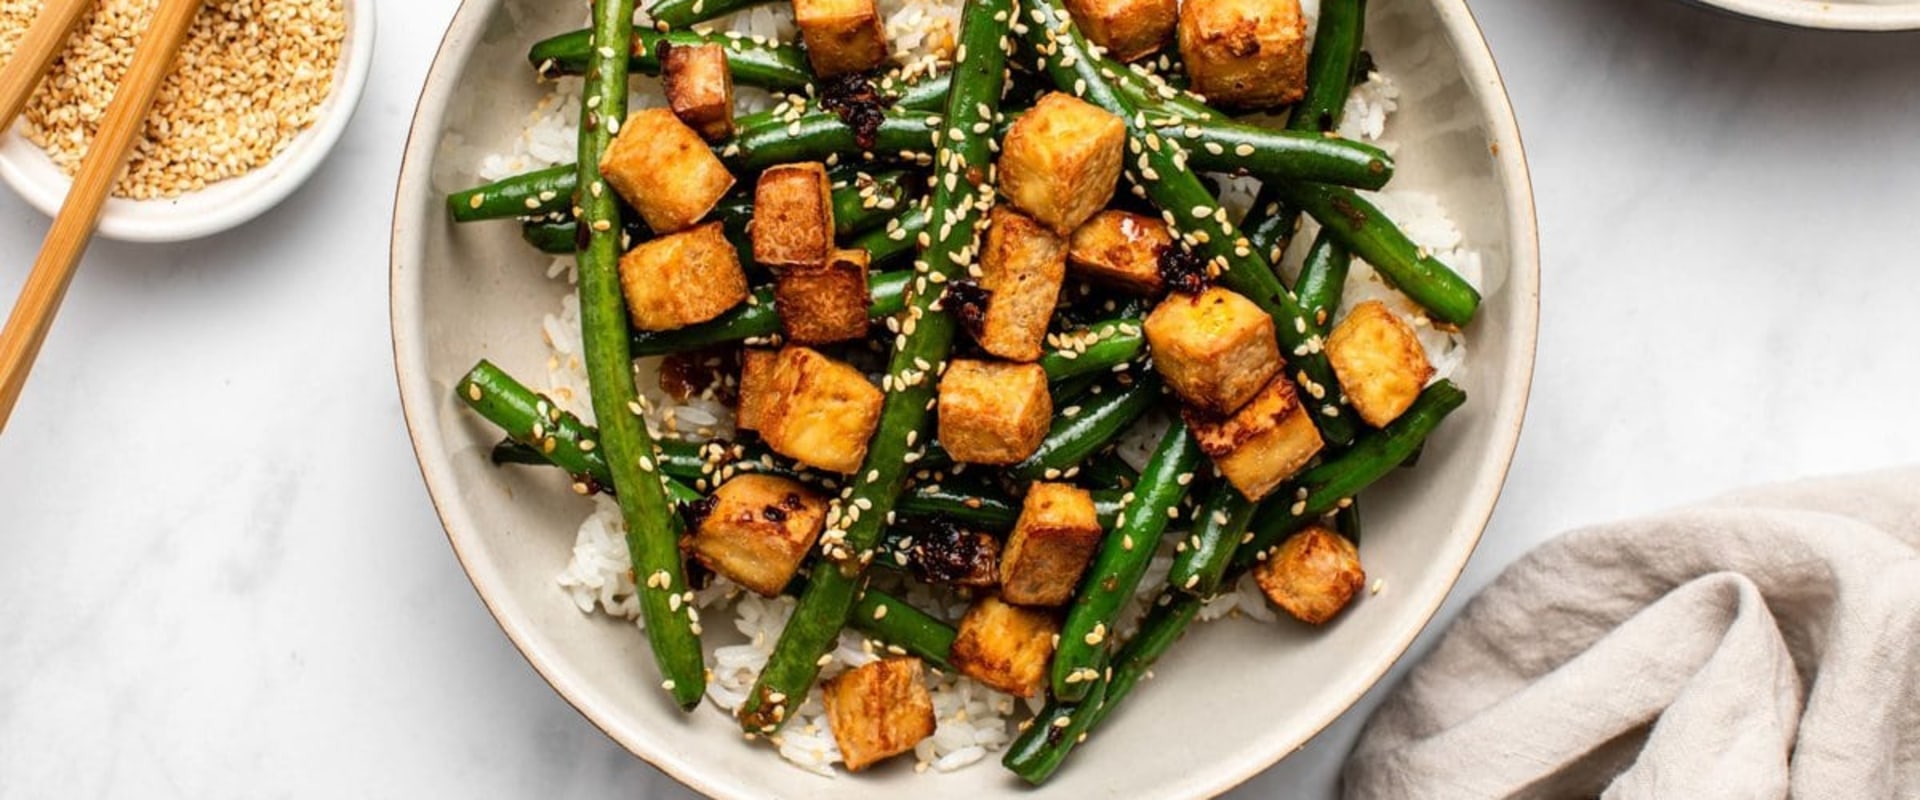 Delicious Tofu and Vegetable Stir Fry Recipe